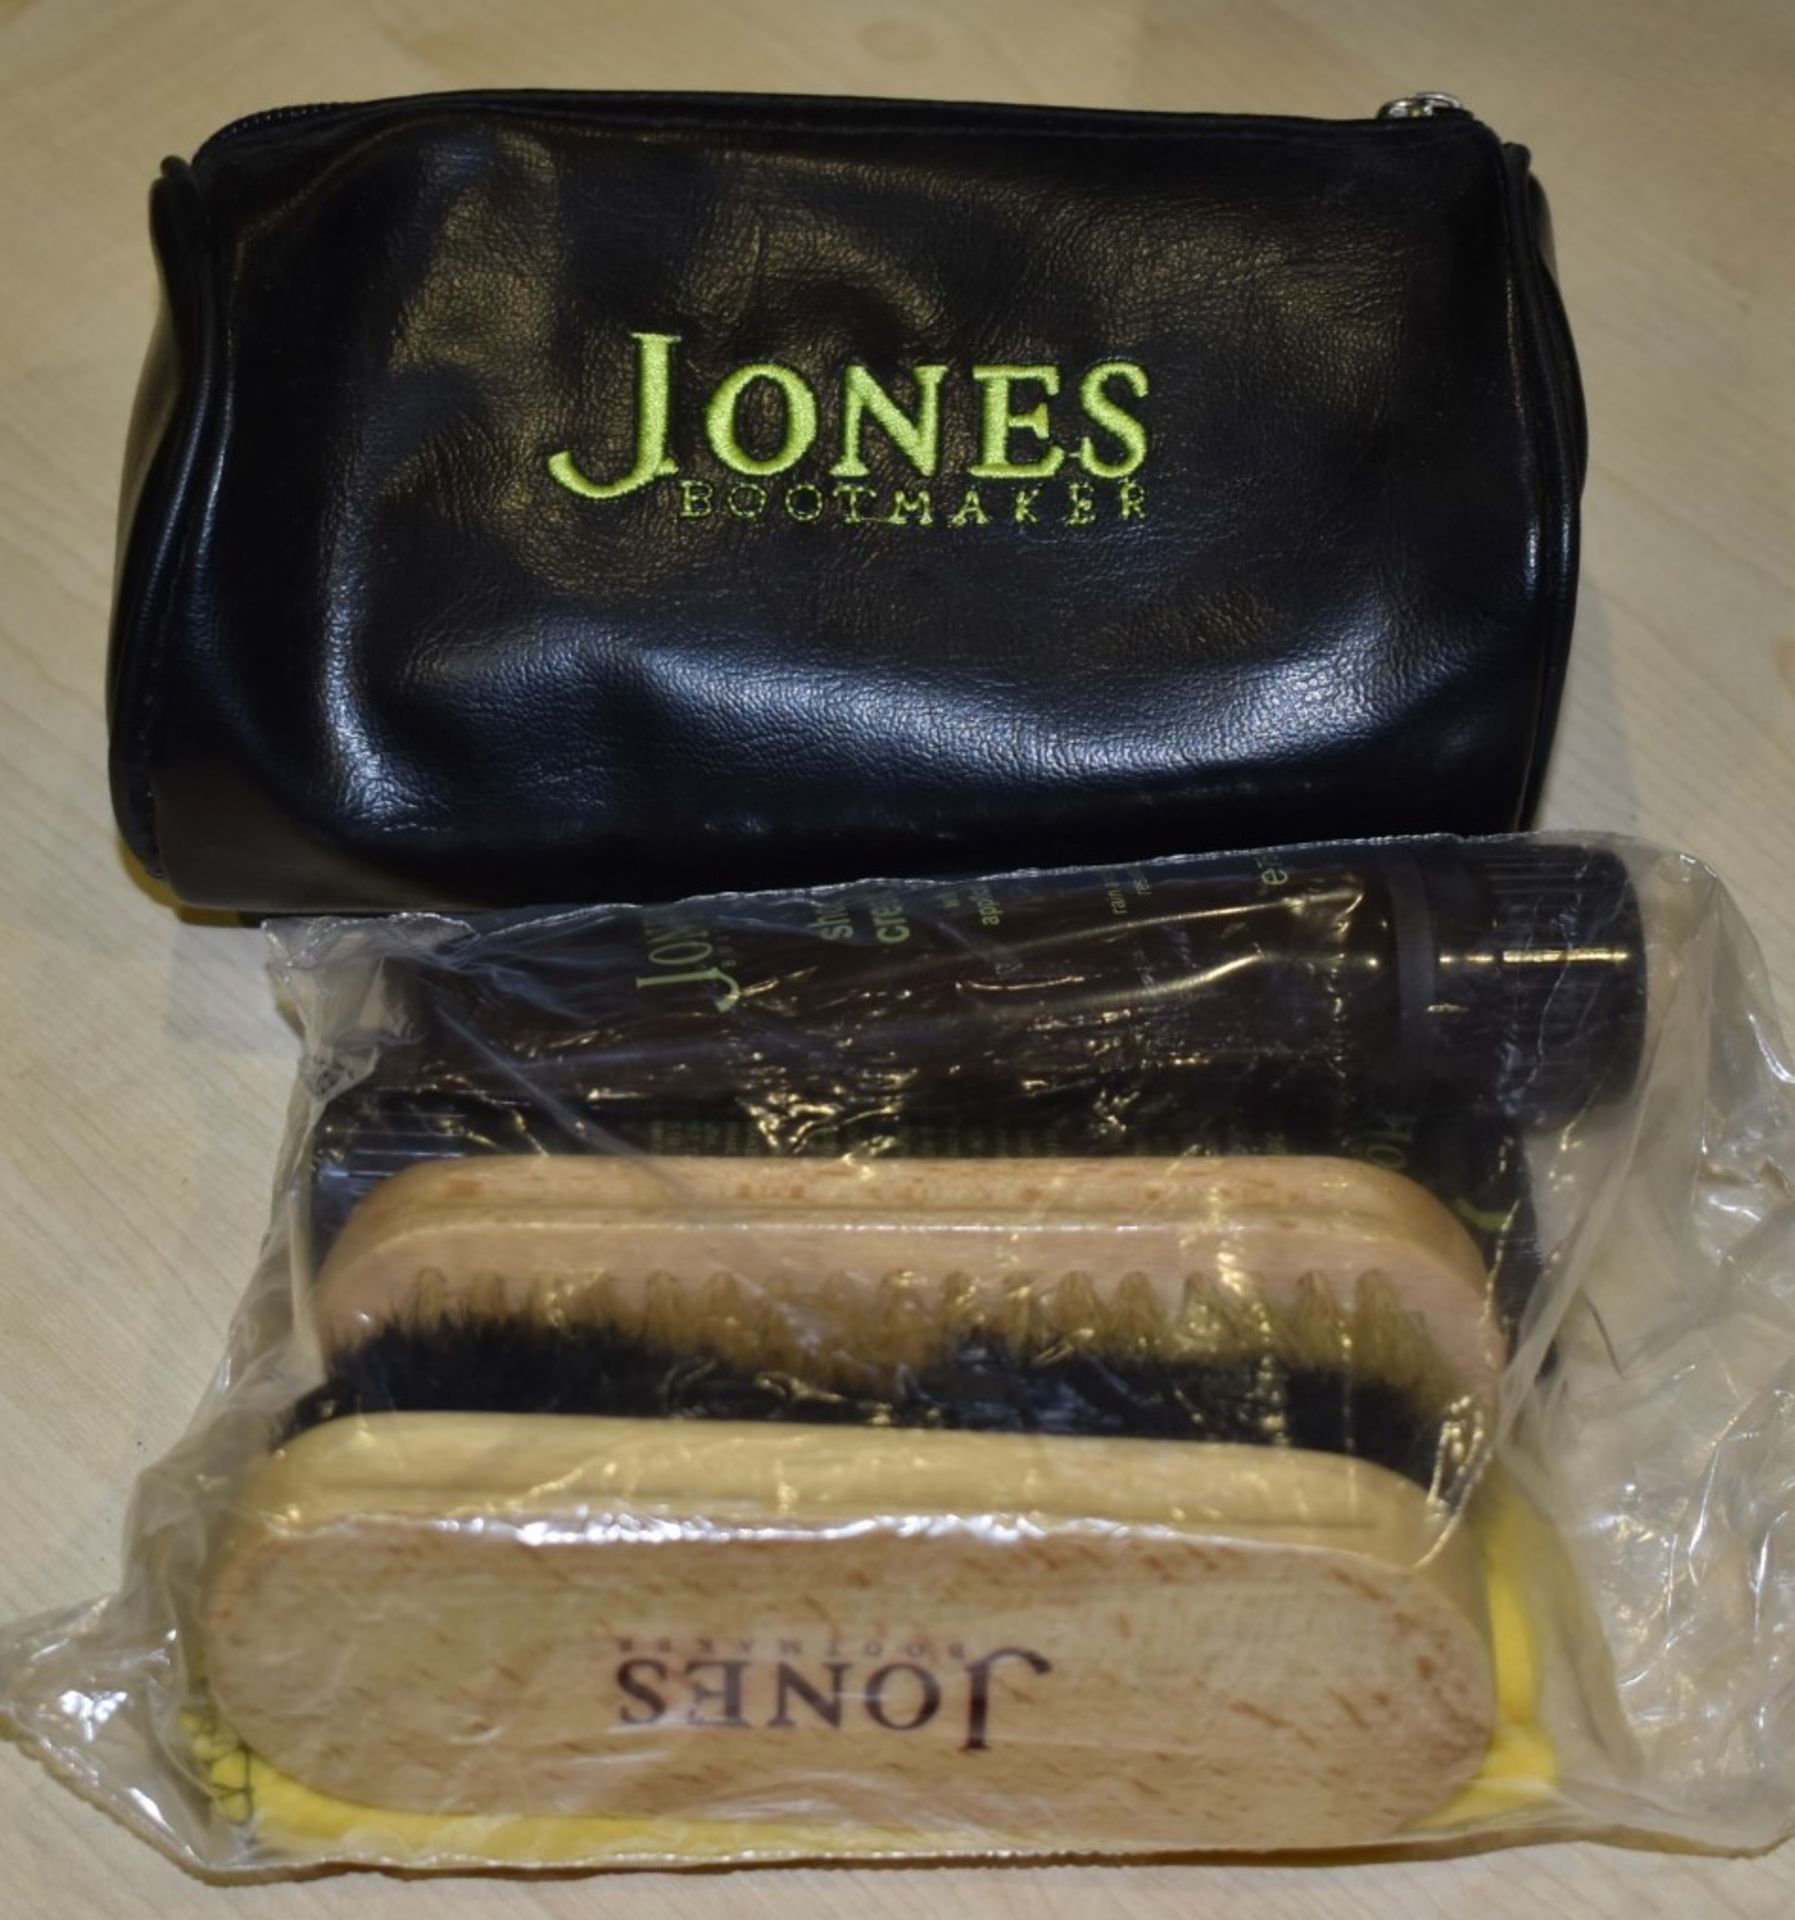 1 x Brand New Jones Shoe Cleaning Kit - Includes Creams, Brushes, Clothe and Carry Case - Ref: - Image 2 of 4